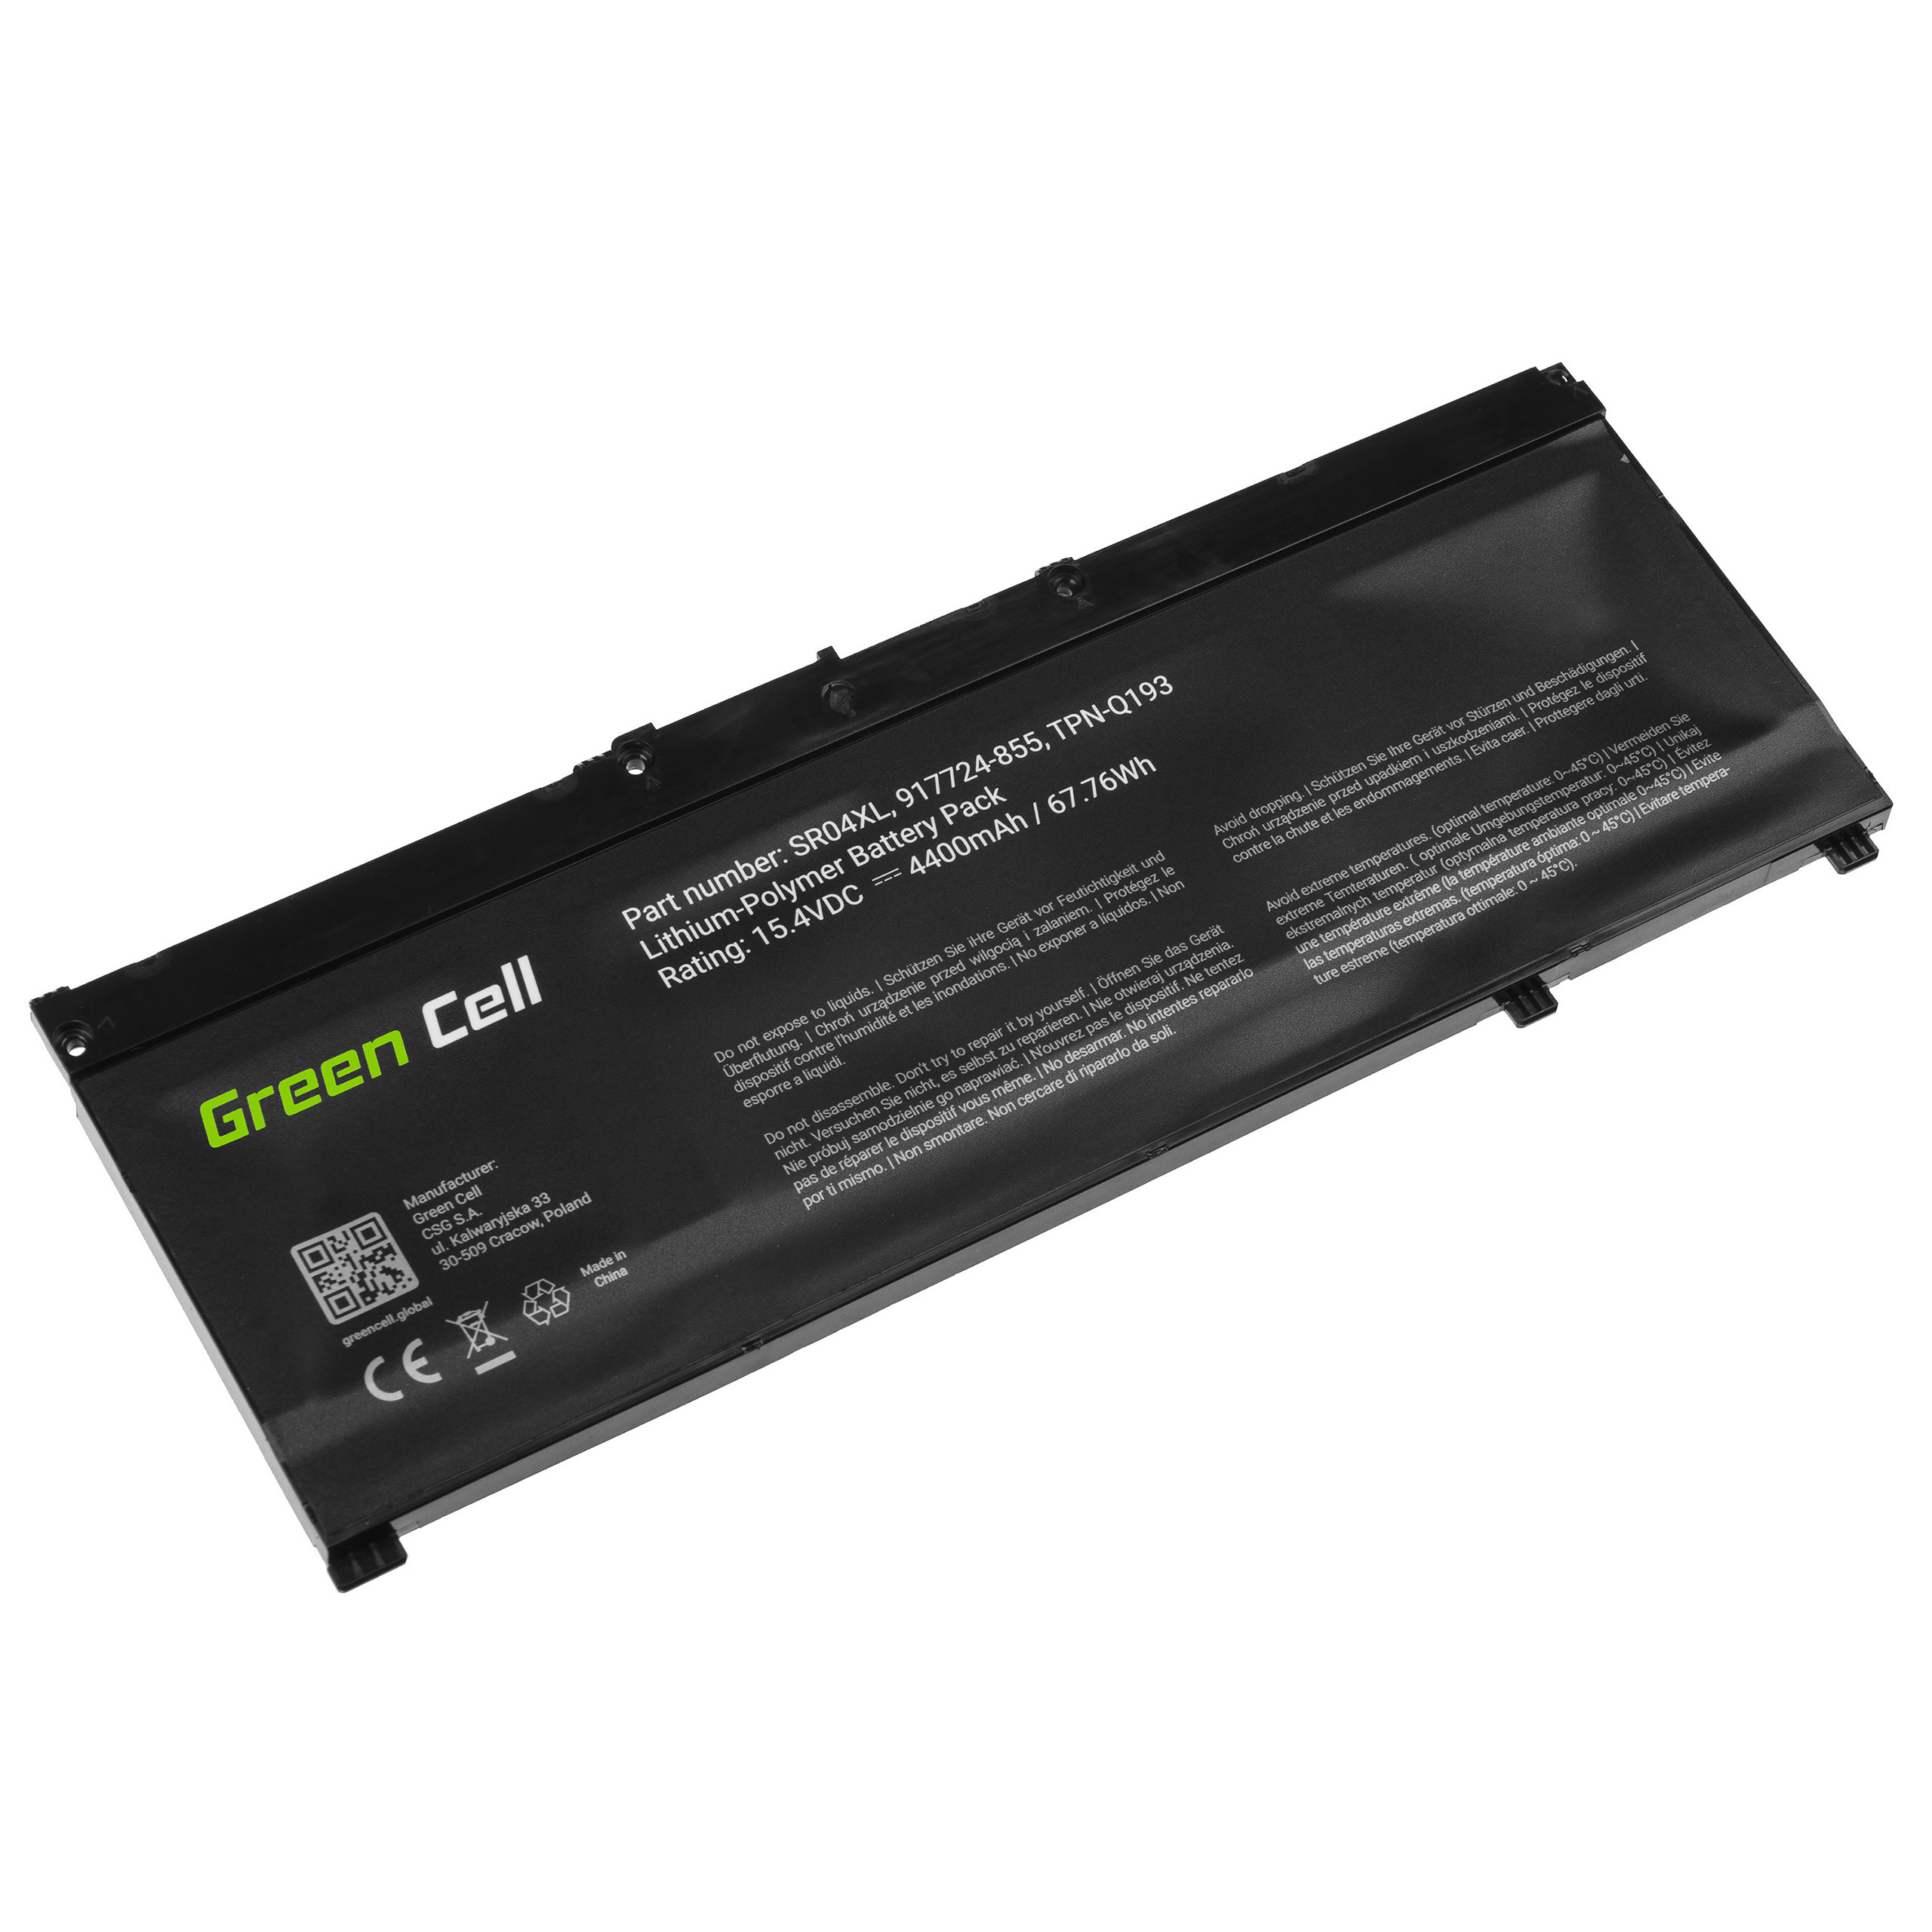 Green Cell Battery SR04XL for HP Omen 15-CE 15-CE004NW 15-CE008NW 15-CE010NW 15-DC 17-CB, HP Pavilion Power 15-CB